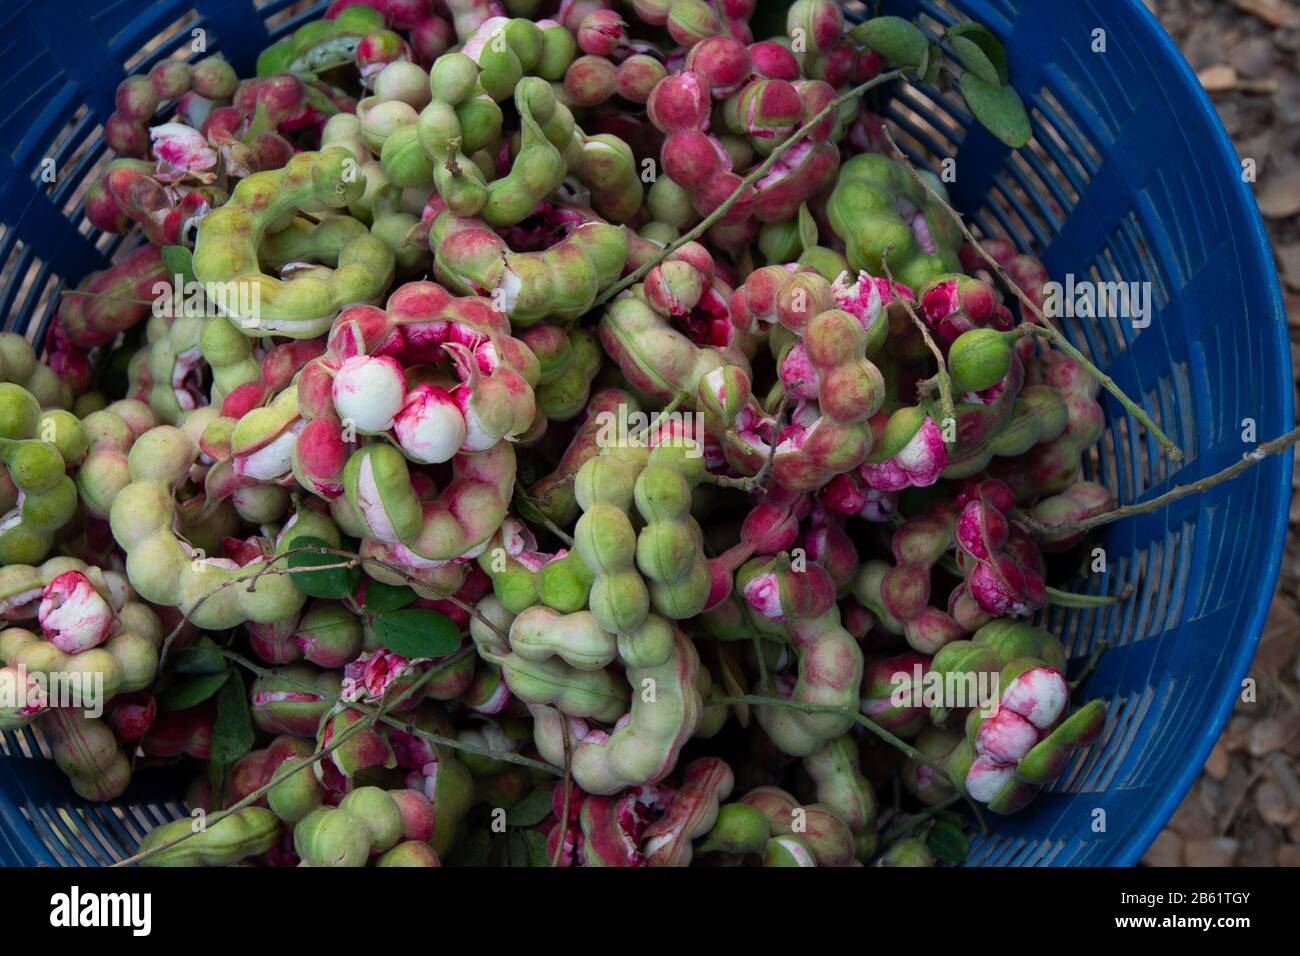 A view of ripe harvested Pithecellobium dulce fruits.The harvest of the Pithecellobium dulce also known as Madras Thorn is from December to March. Stock Photo